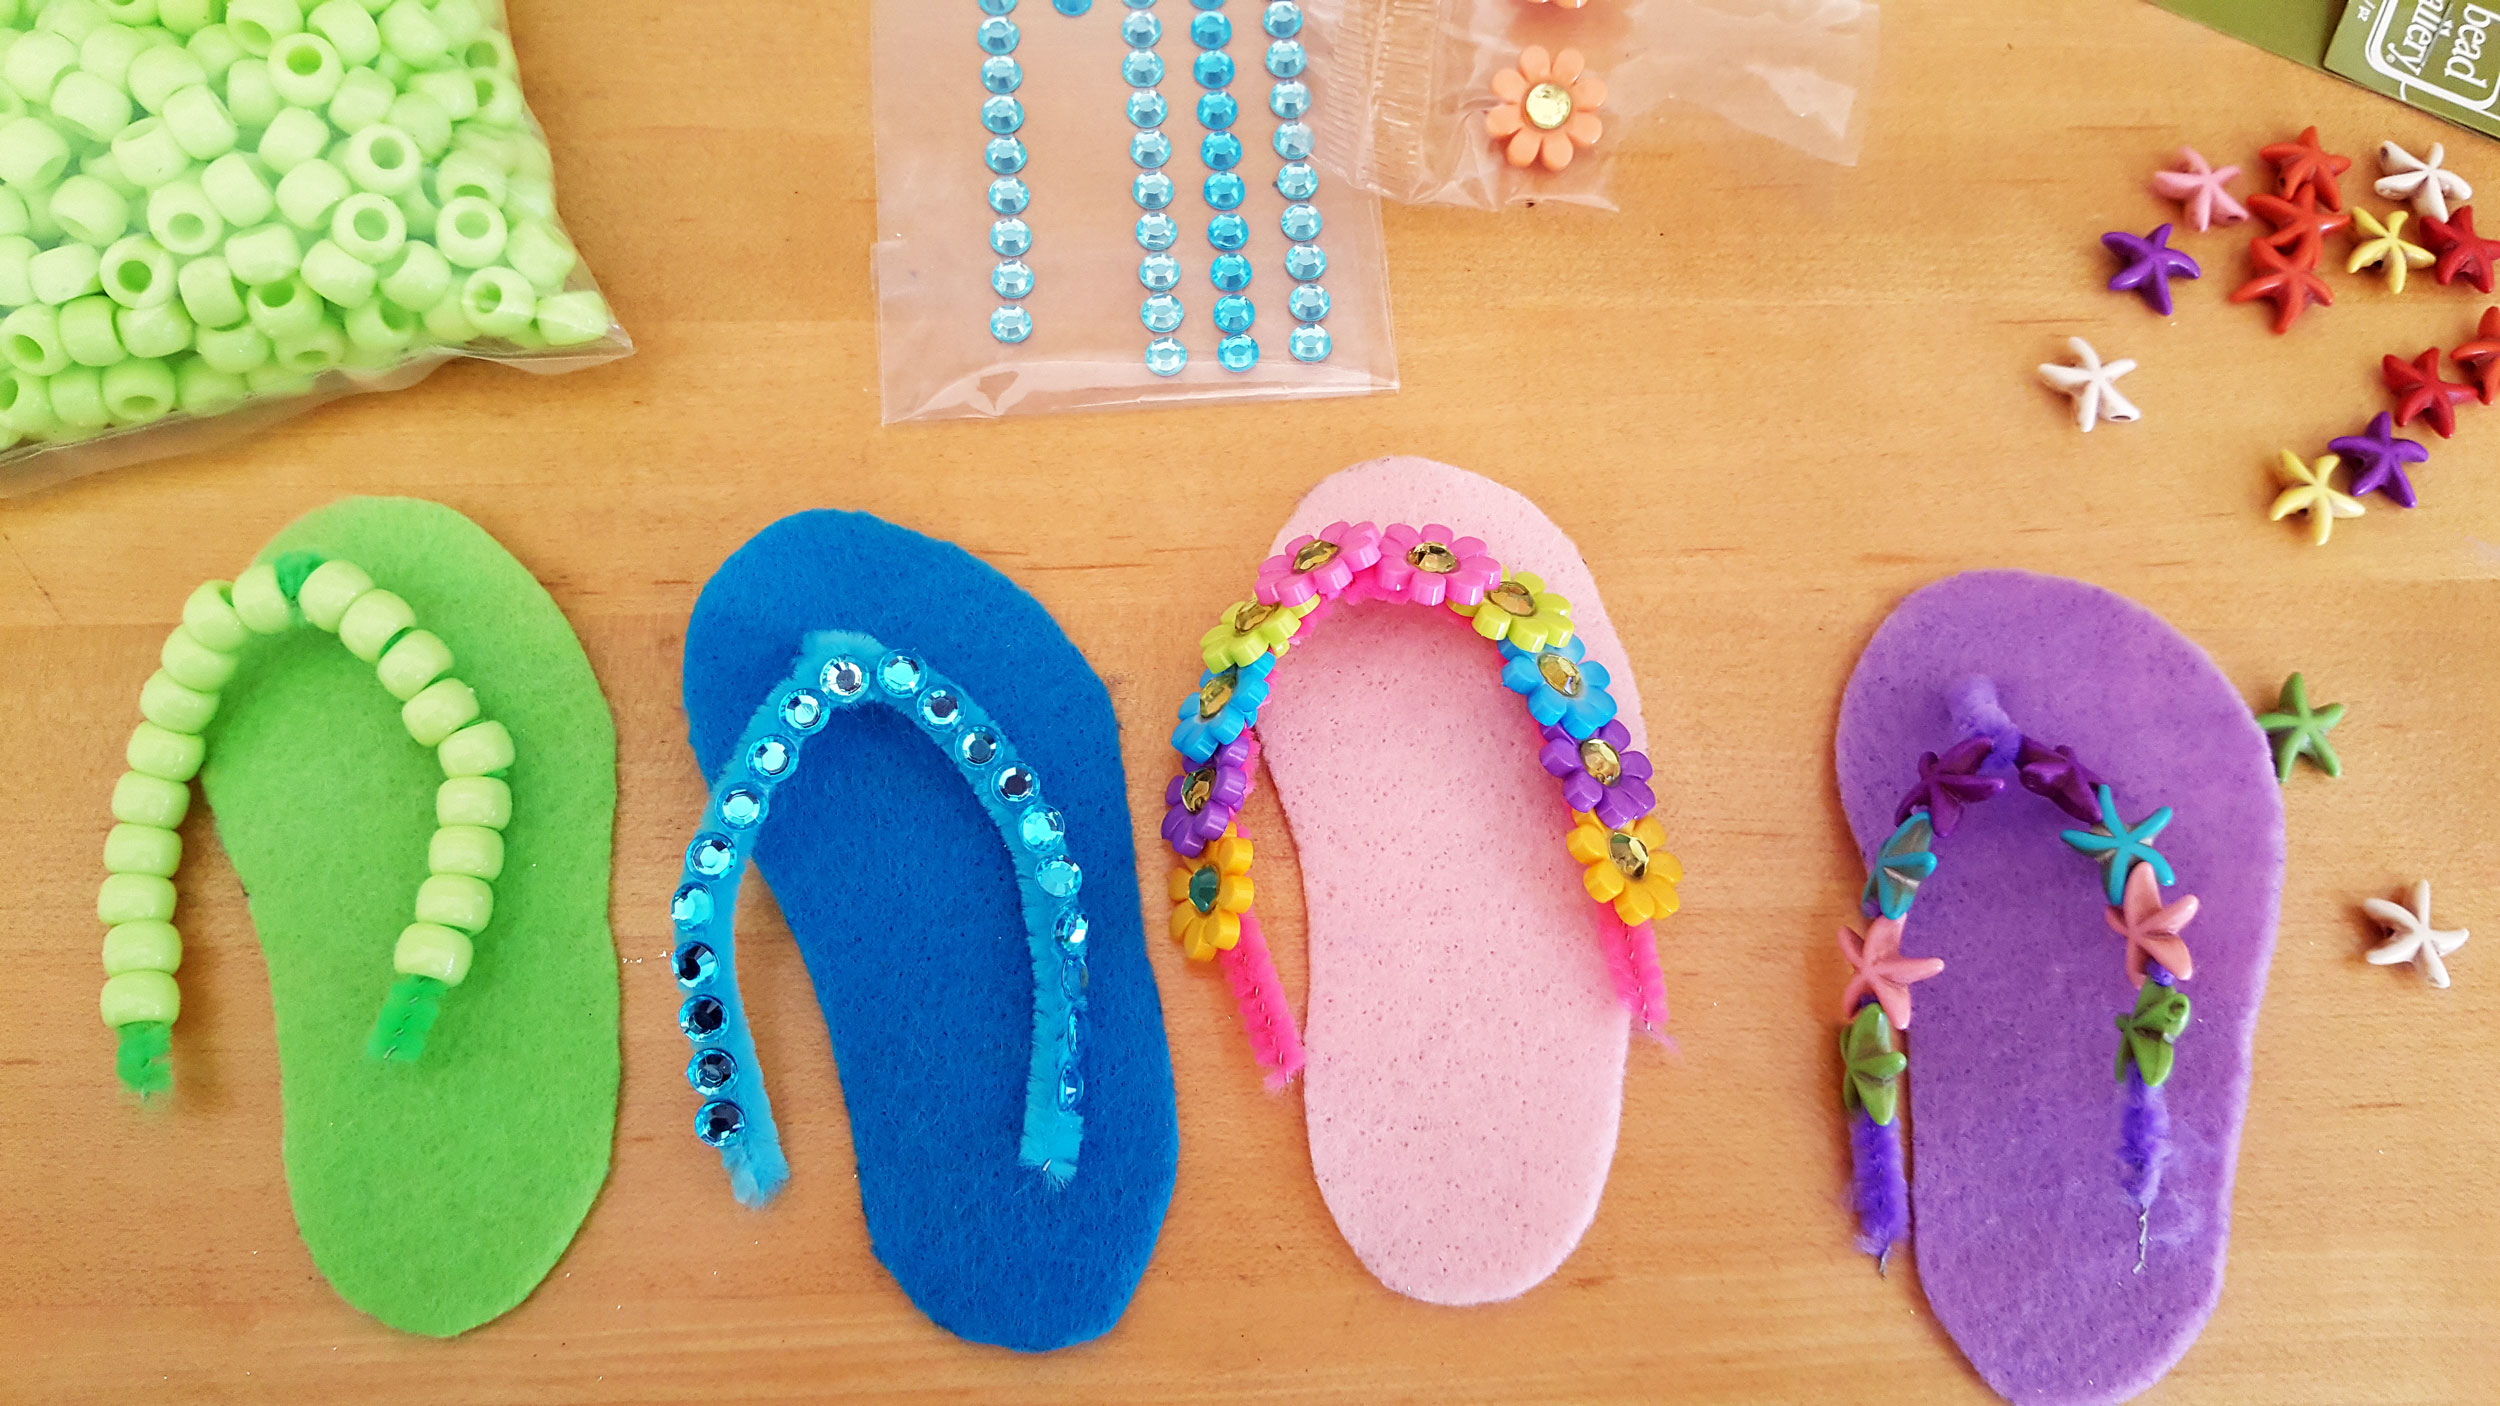 Pipe cleaners decorated with various types of pony beads. Pipe cleaners attached to felt flip flop shape. | OrnamentShop.com